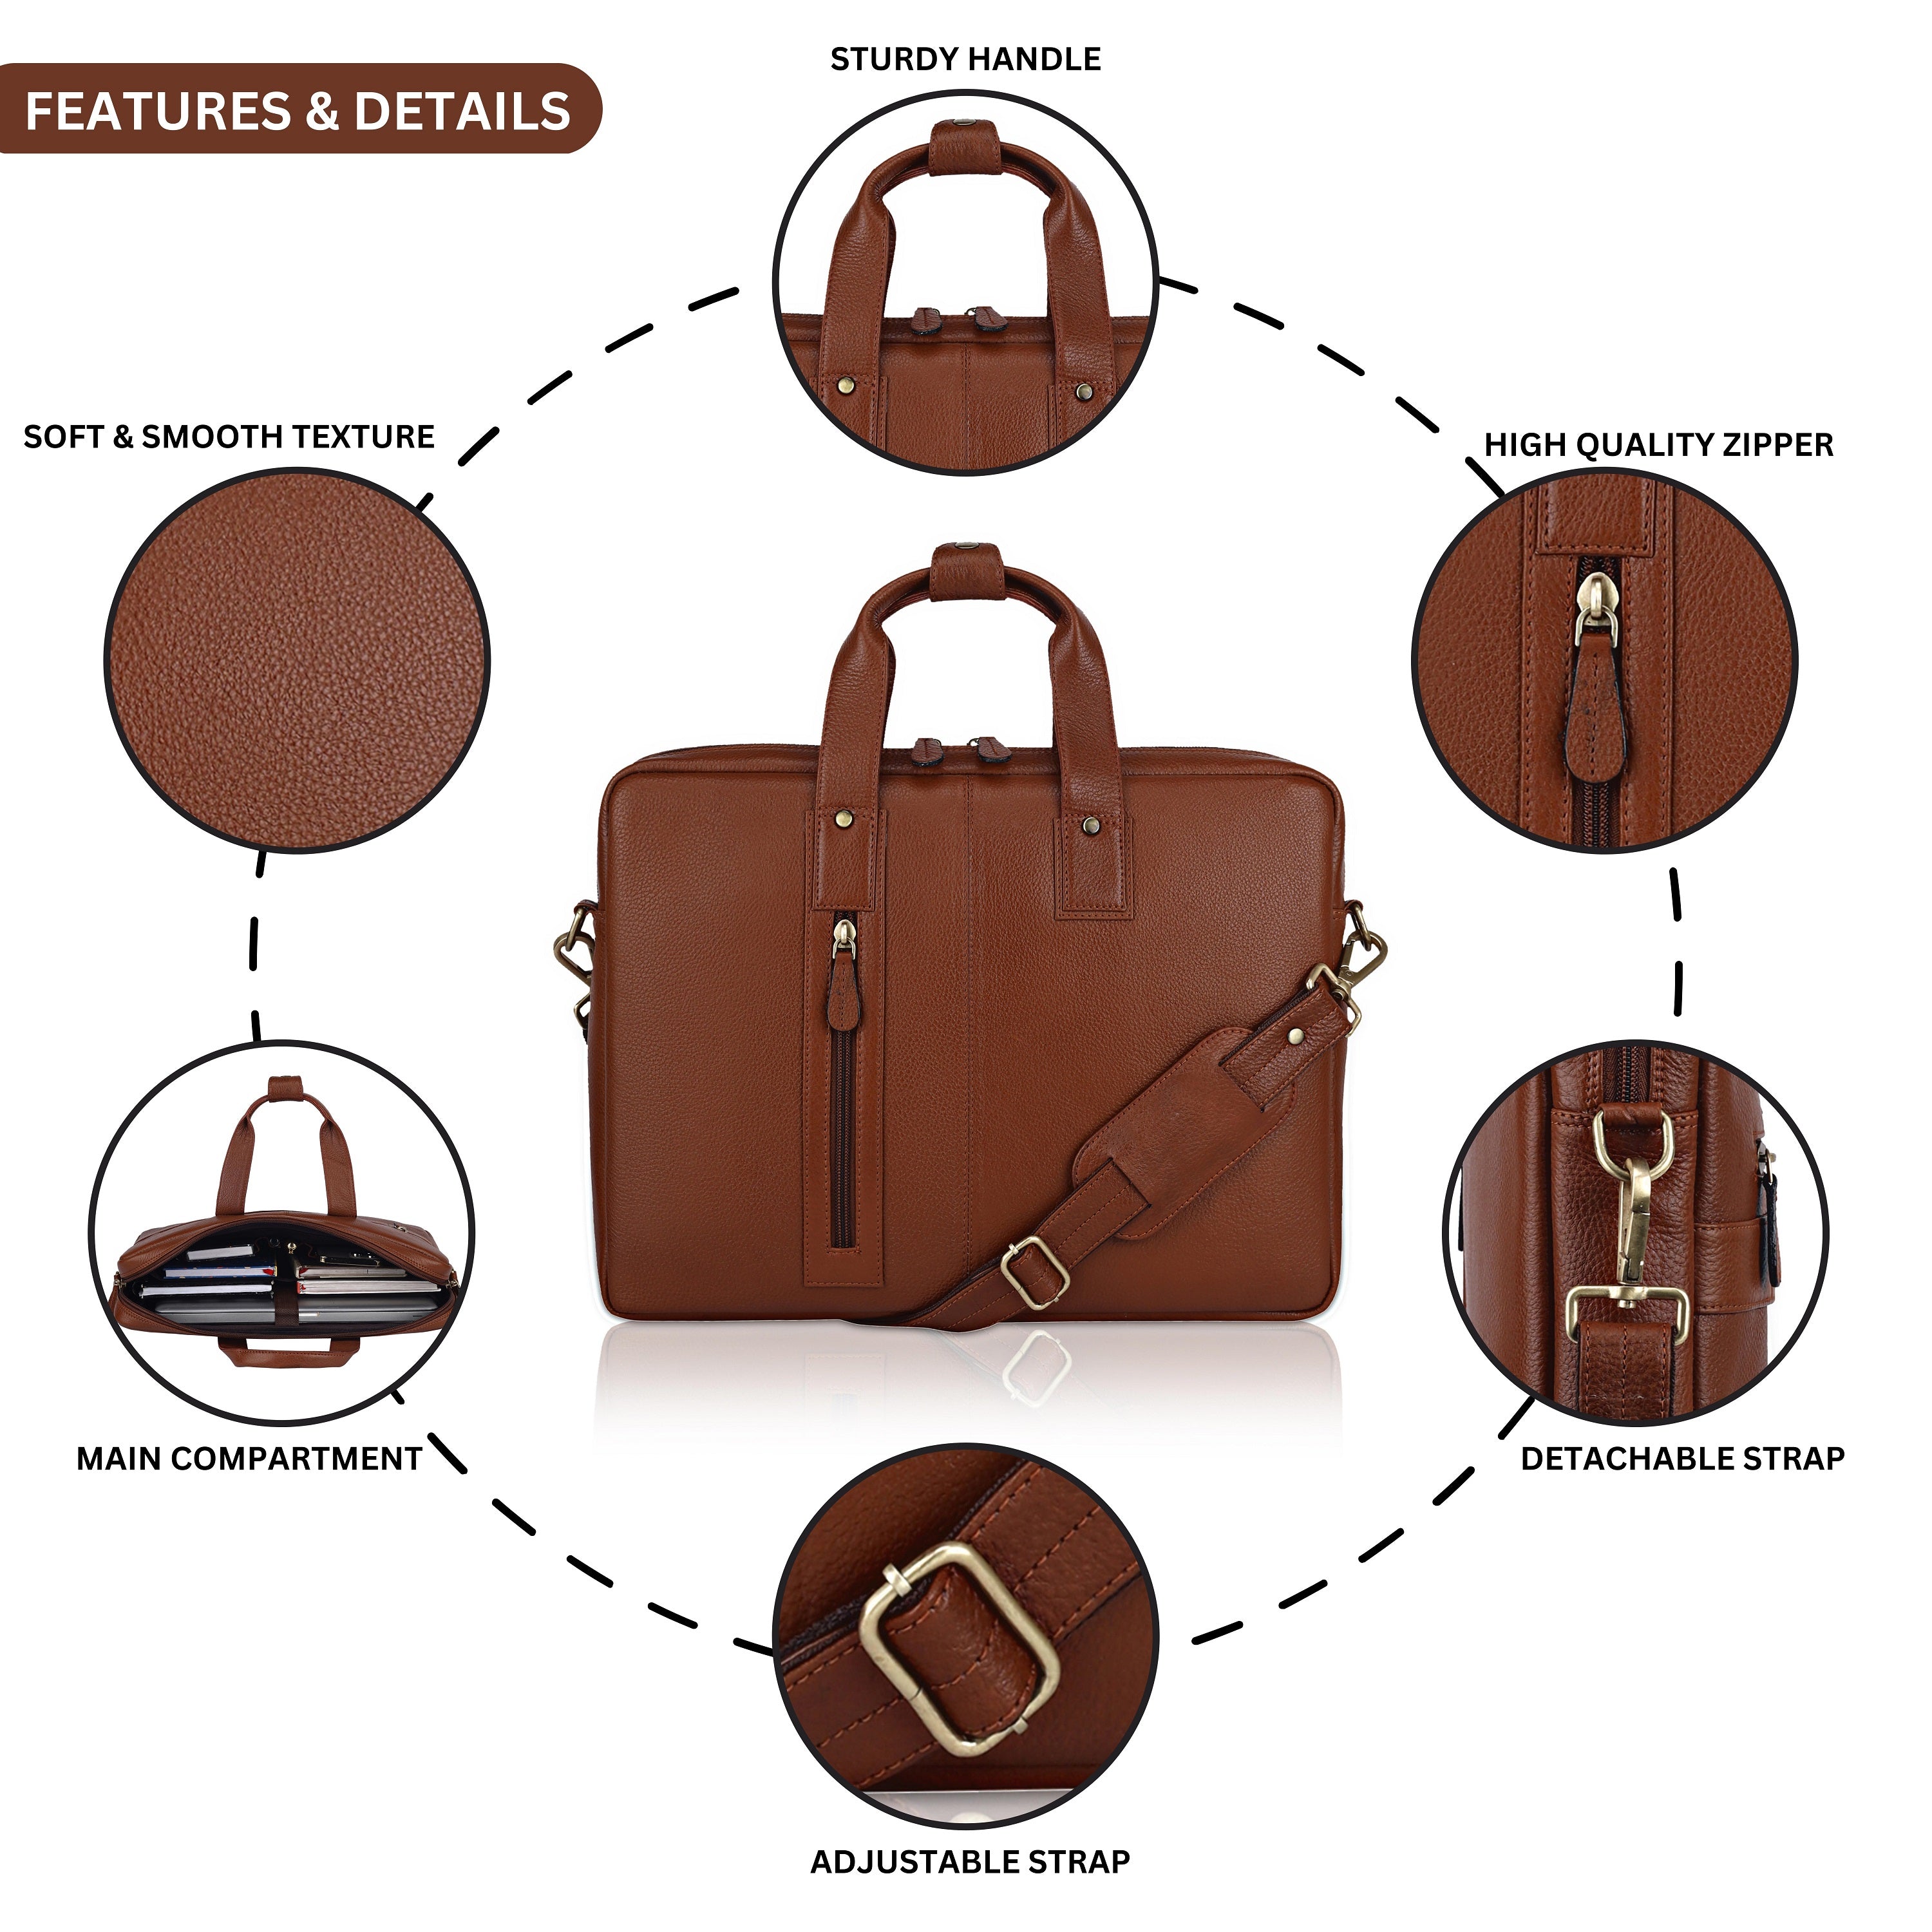 Genuine Leather Laptop Messenger Bags for Men and Women Tan SkinOutfit